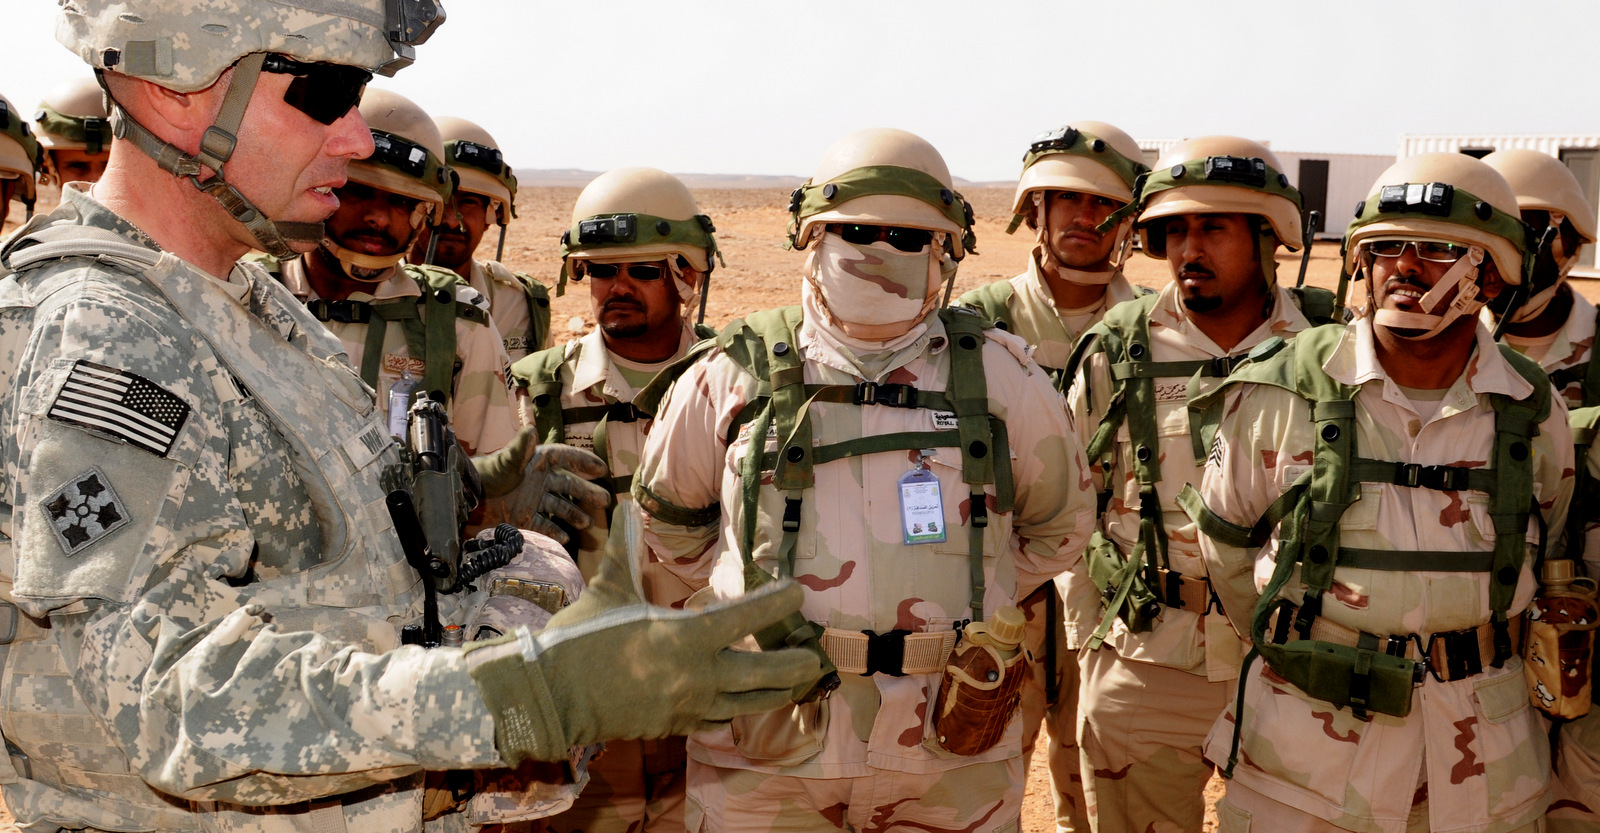 U.S. and Saudi troops engage in a joint training exercise in Saudi Arabia. (U.S. Army Photo)